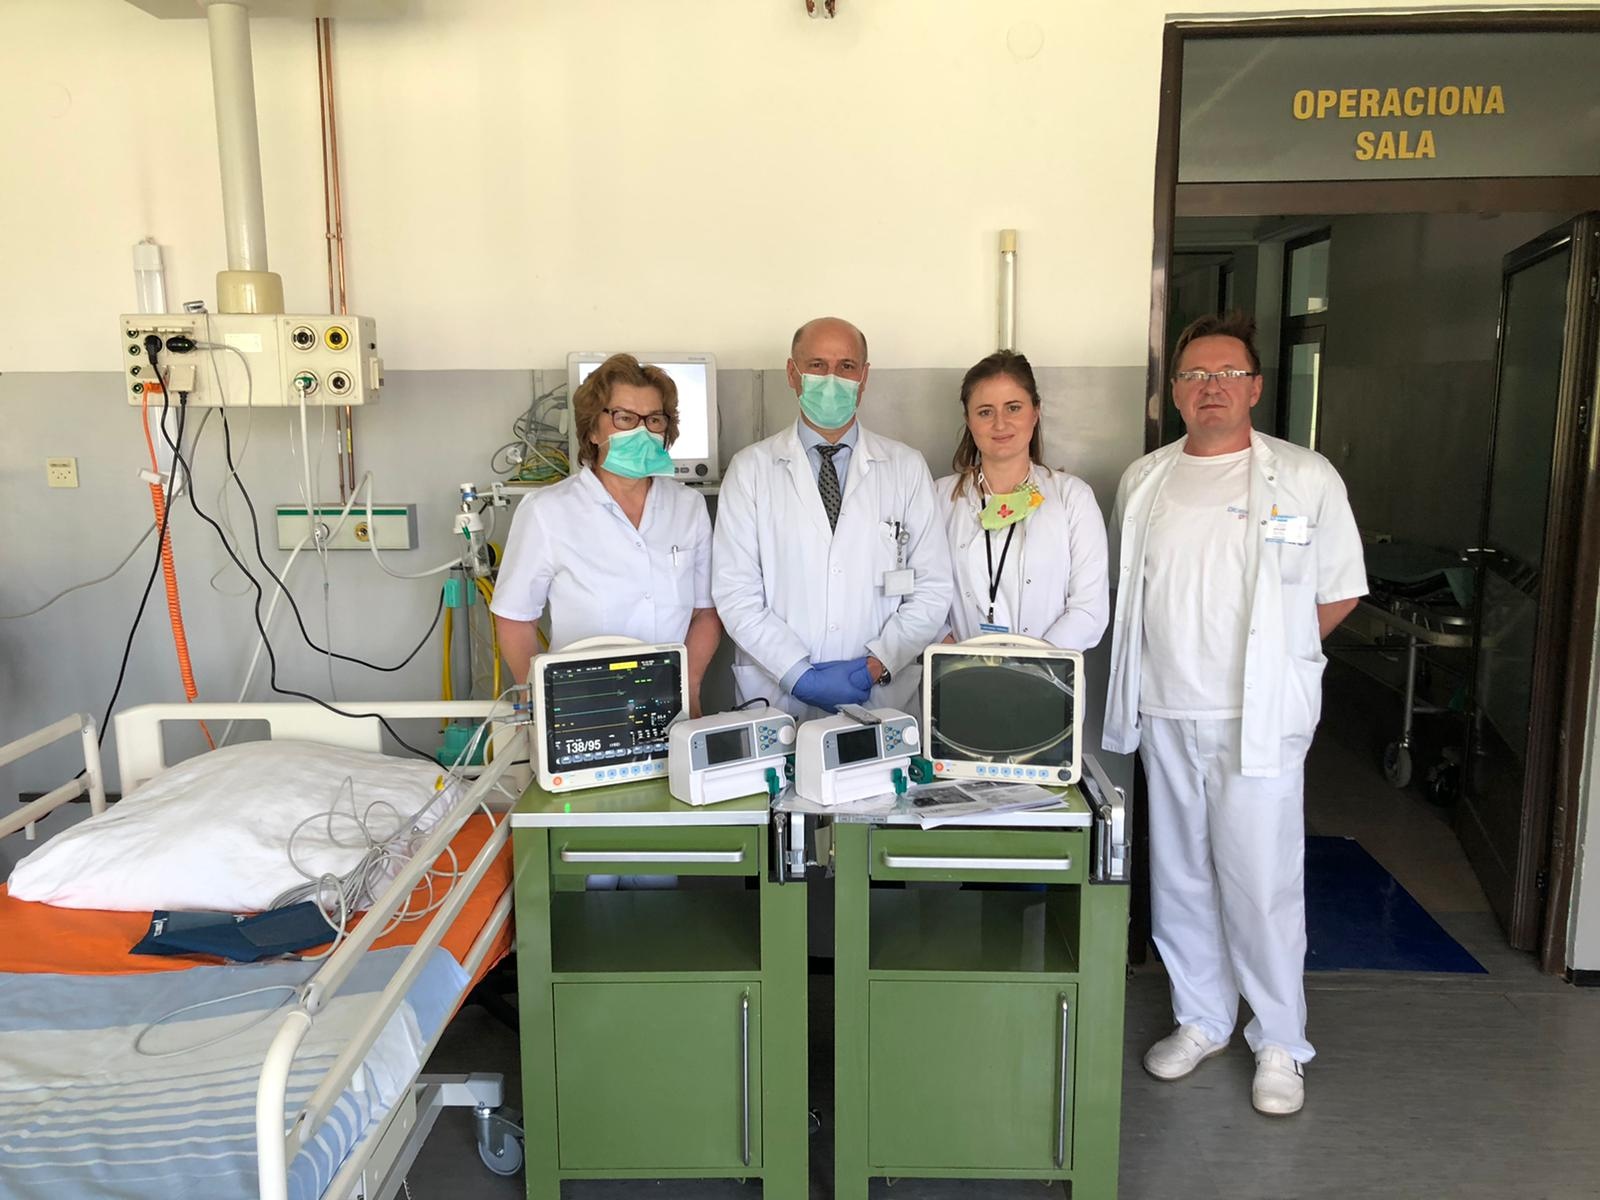 Customers in Poland have received ventilators, syringe pumps, and monitors.